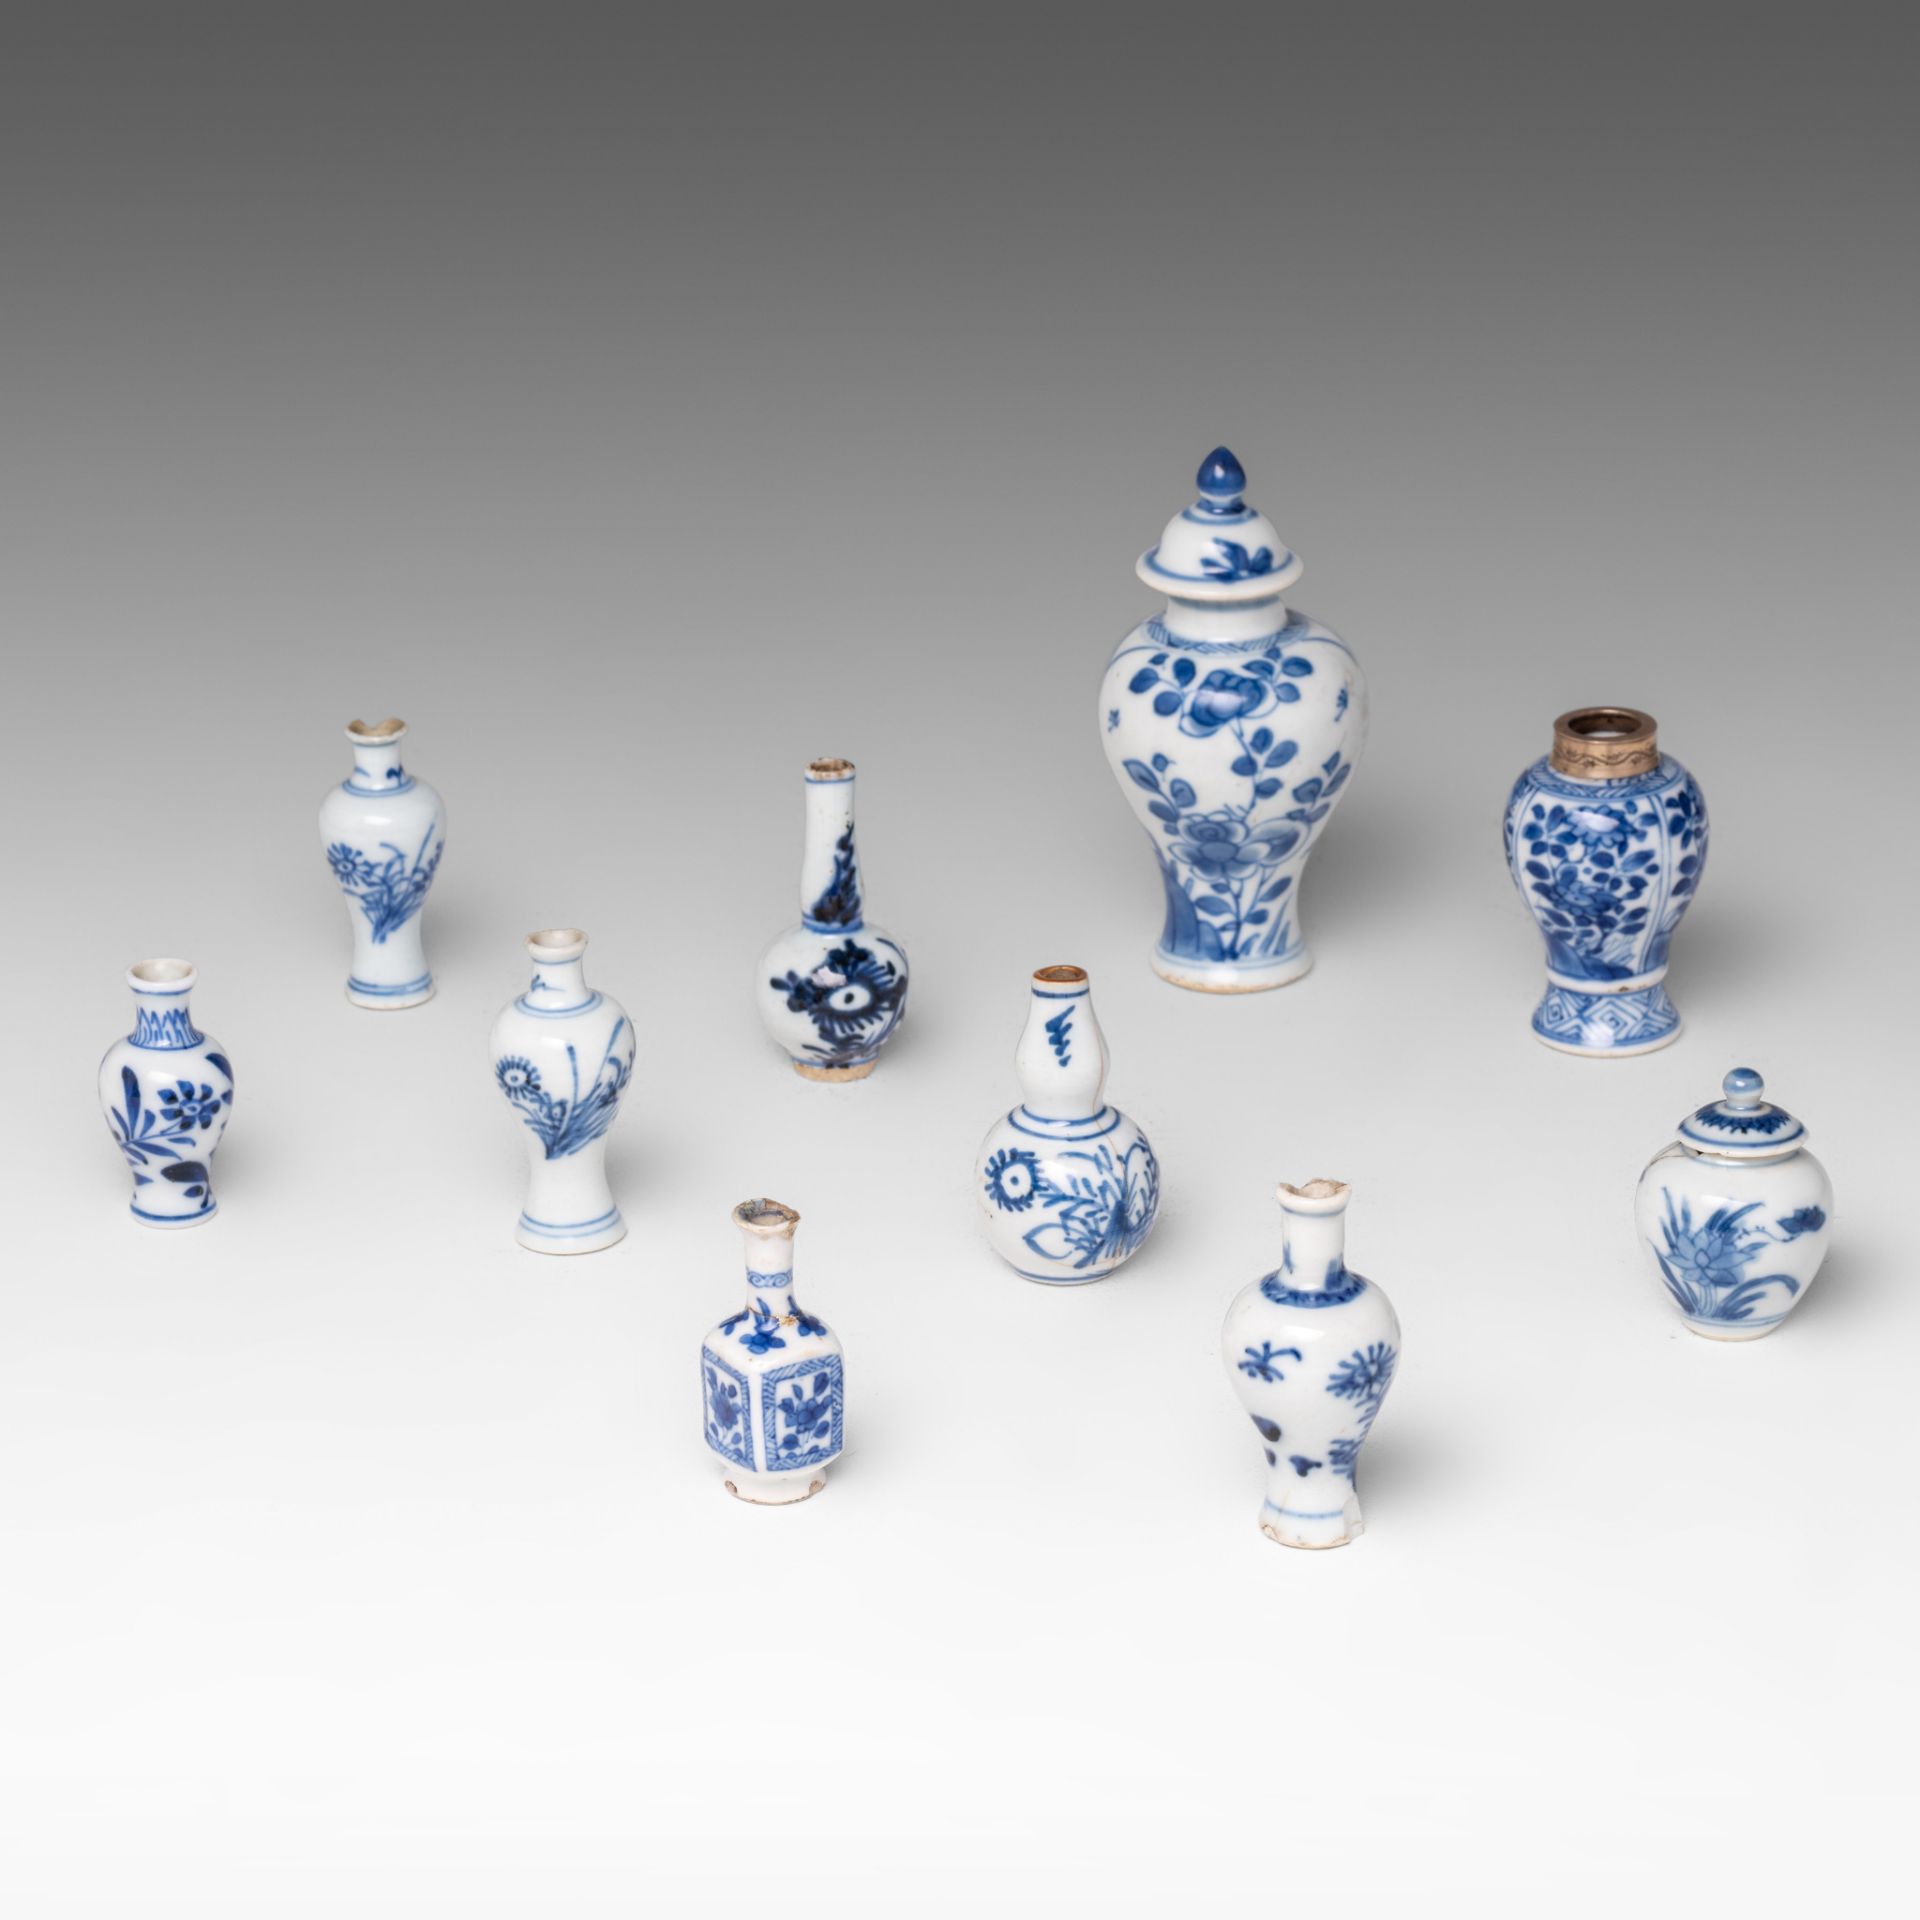 A collection of ten Chinese miniature vases, some Kangxi and some Qianlong period, tallest H 11 cm (